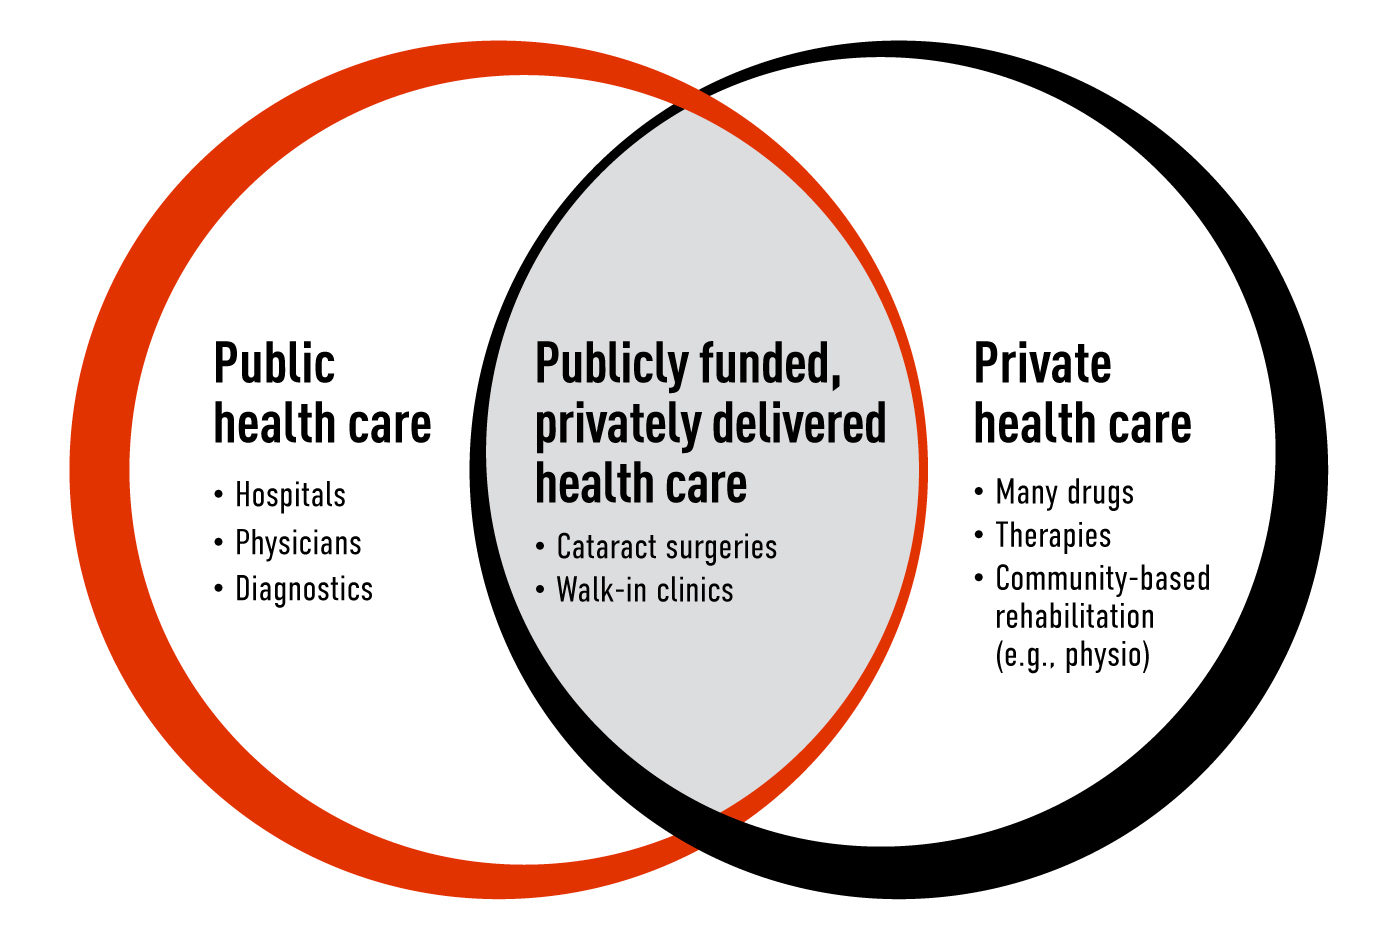 Venn diagram of publicly and privately funded health care in Canada, with hospitals, physicians and diagnostics sitting under public health care, many drugs, therapies and community based rehabilitation sitting under private health care, and cataract surgeries and walk-in clinic sitting in the middle as publicly-funded, privately-delivered health care.